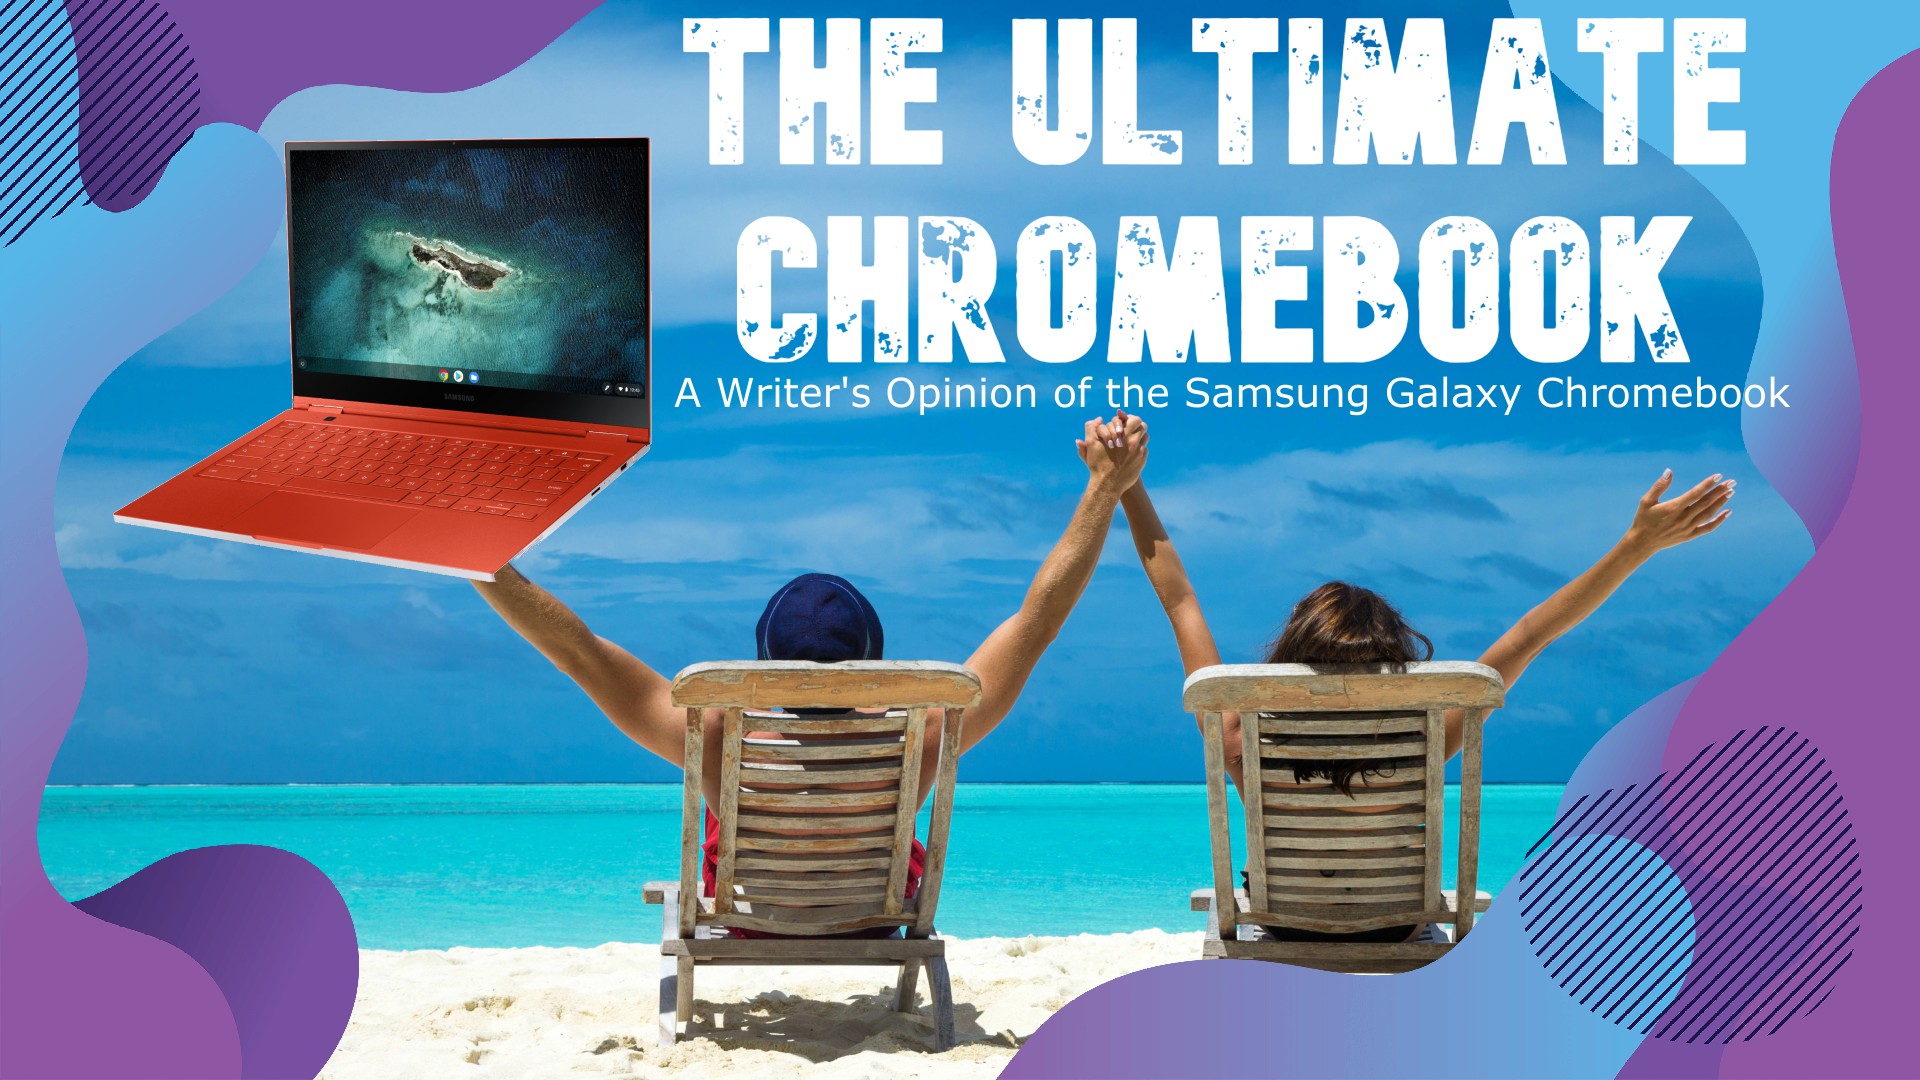 The Ultimate Chromebook: A Writer’s Opinion of the Samsung Galaxy Chromebook